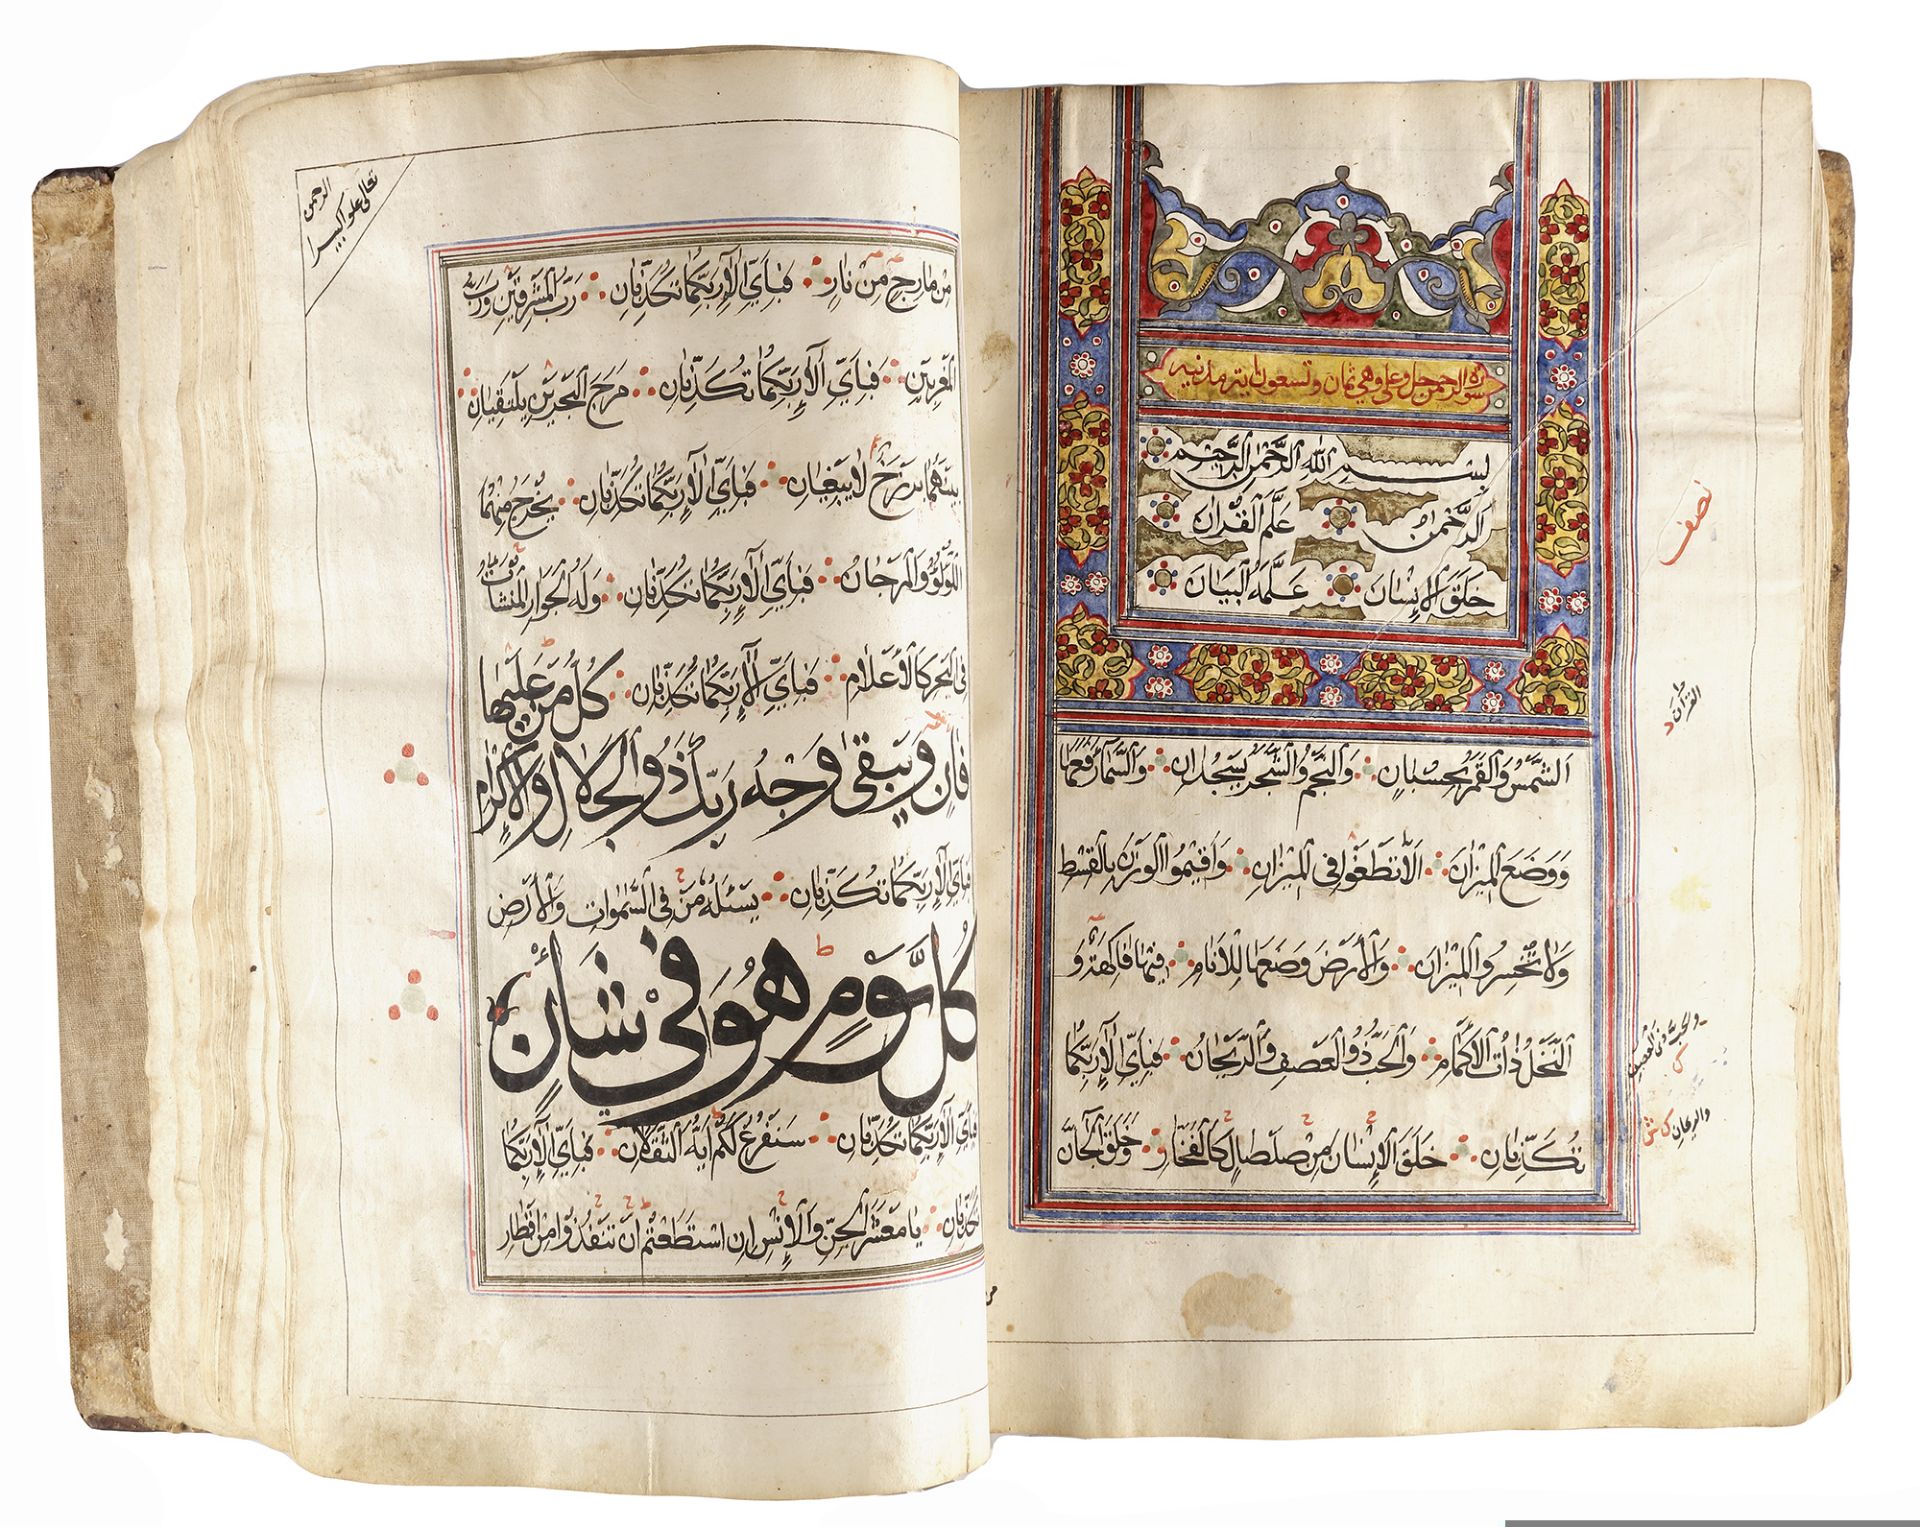 AN ILLUMINATED QURAN, YEMEN, BY AHMED QASEM IBN ISMAIL IN 1035 AH/1626 AD - Image 4 of 18